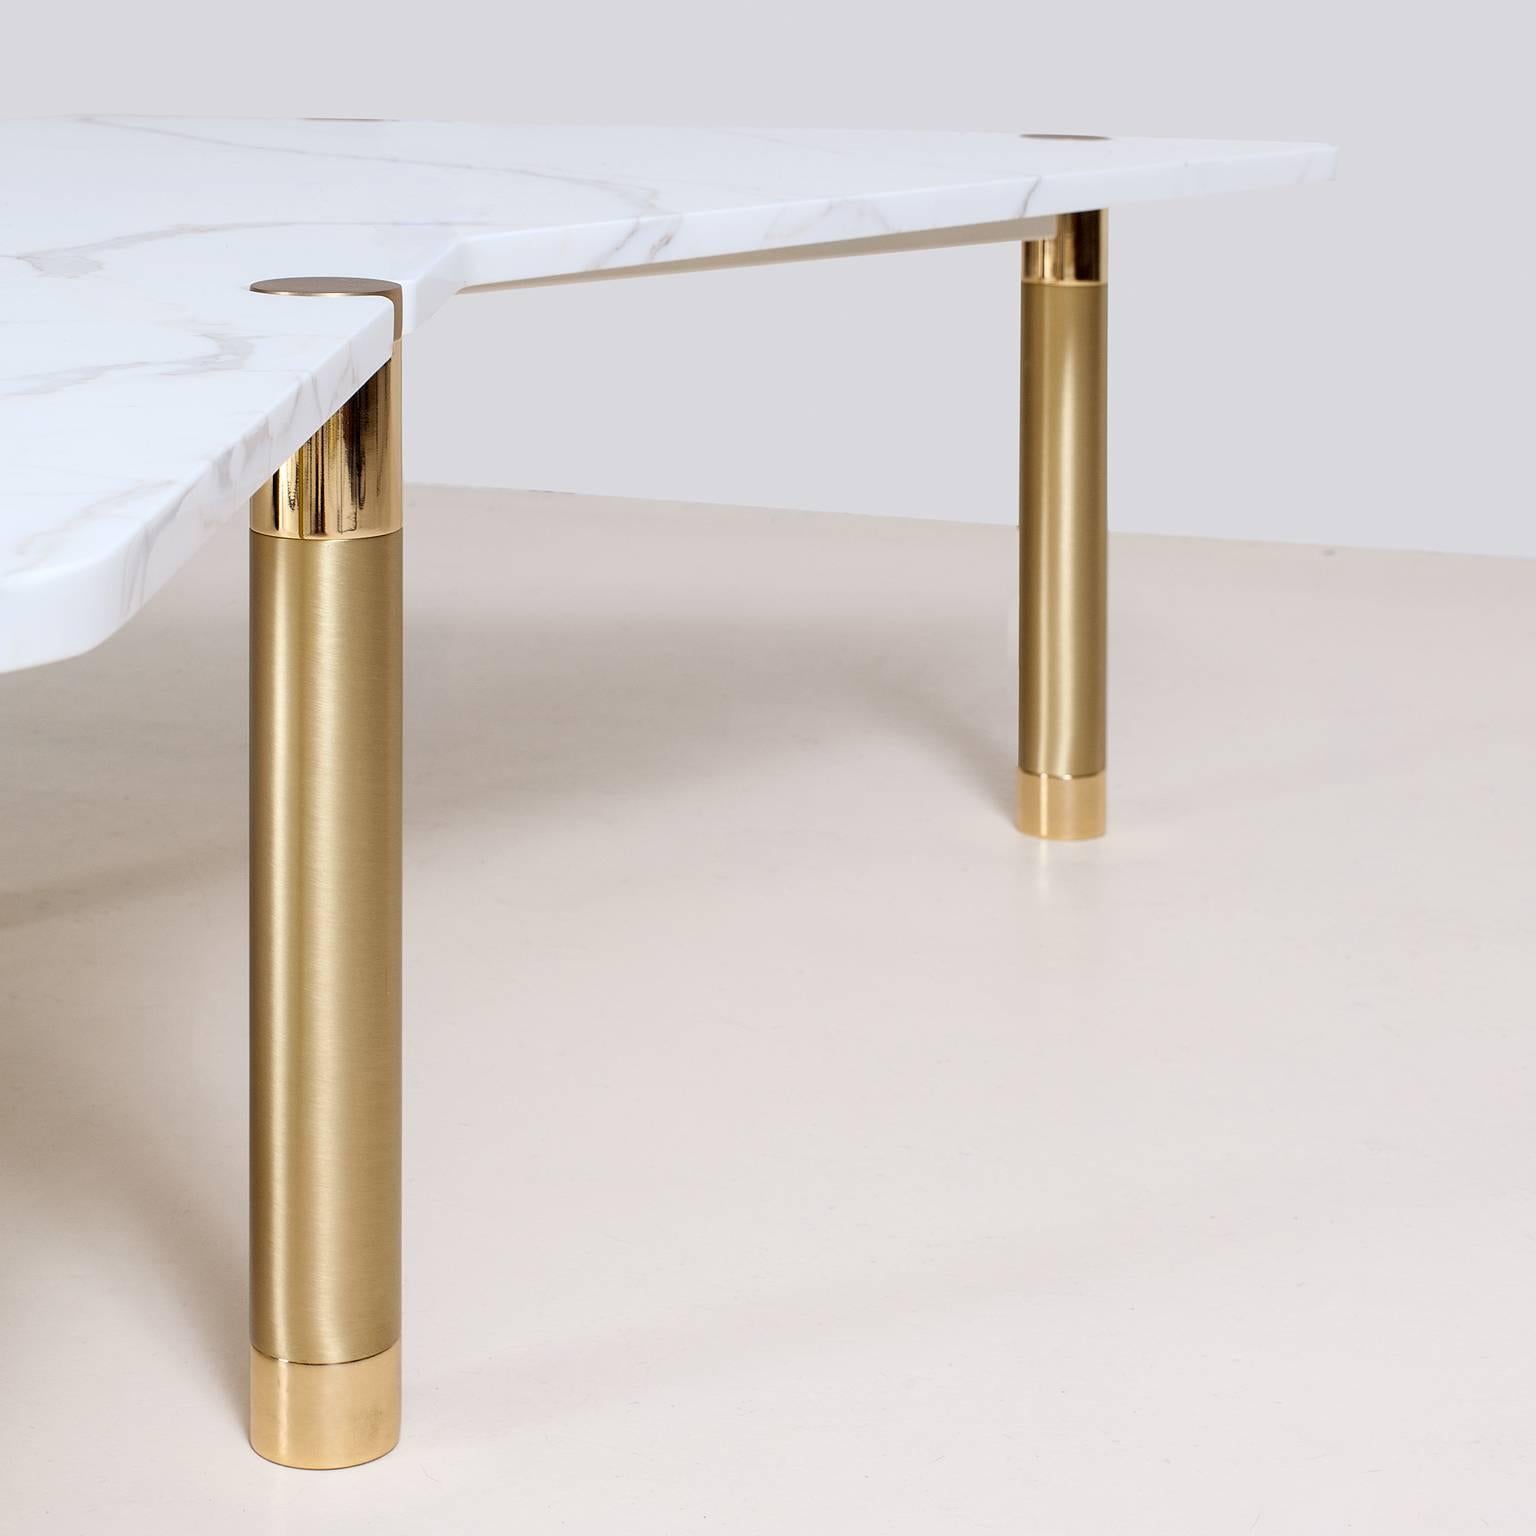 The Nova Table Collection pairs multiple metal finishes with wood and marble tops of various shapes and sizes. Select from available options or specify your own top and mix of finishes.

AVRAM RUSU STUDIO is a Brooklyn based design studio known for